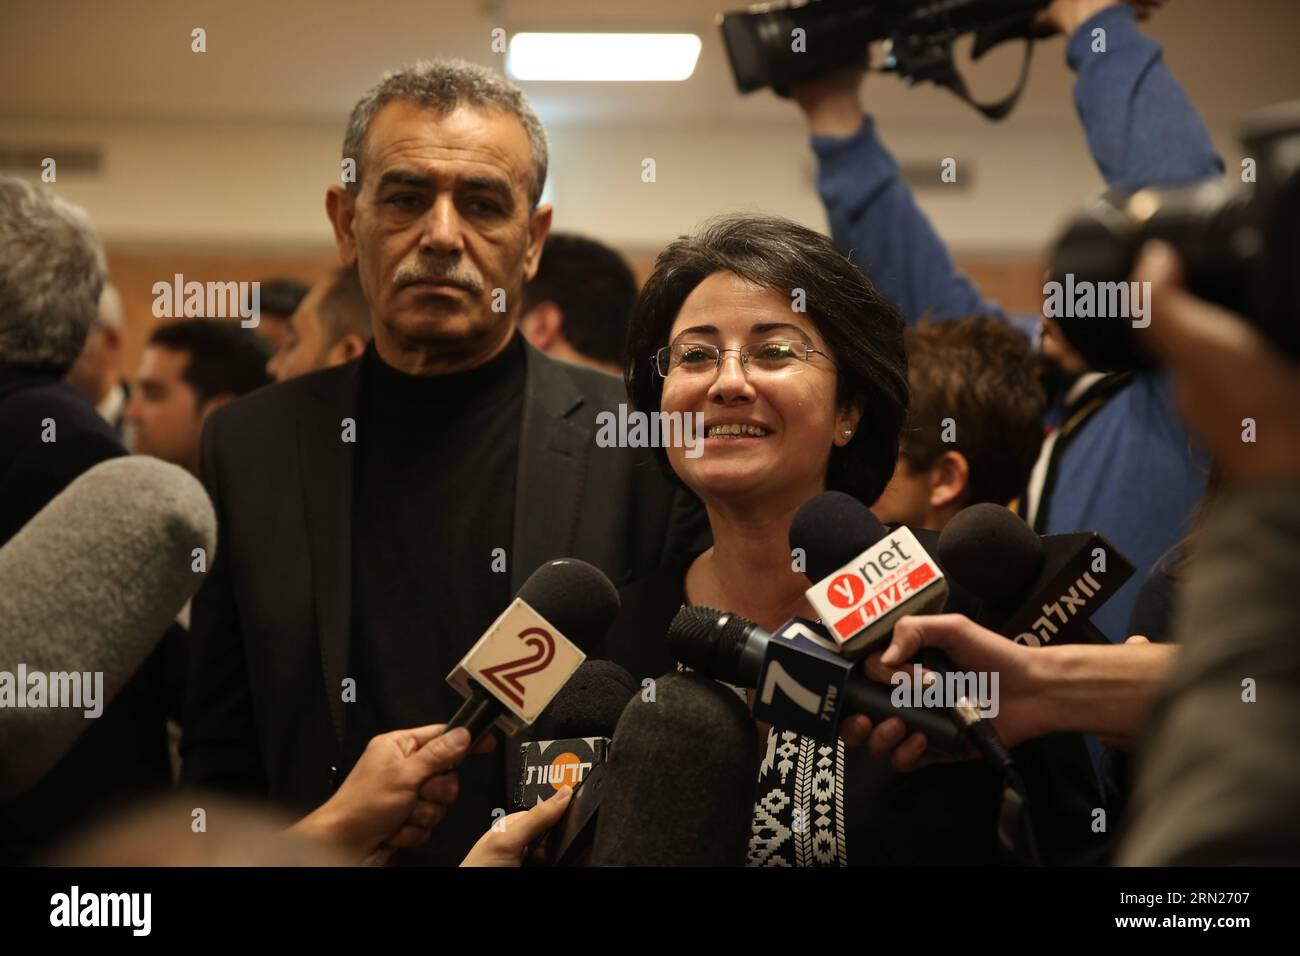 (150213) -- JERUSALEM, Feb. 12, 2015 -- Arab Israeli lawmaker Hanin Zoabi (C) speaks to the press after a vote to disqualify her from running for Knesset elections at the Israeli Central Elections Committee in the Israeli Knesset (parliament) in Jerusalem, on Feb. 12, 2015. The Israeli Central Elections Committee decided on Thursday to ban an Arab lawmaker and a far right-wing activist from running in the upcoming elections due to their controversial public remarks. ) MIDEAST-JERUSALEM-ISRAEL-KNESSET-ARAB LAWMAKER-FAR-RIGHTIST-ELECTION-BANNING JINI PUBLICATIONxNOTxINxCHN   Jerusalem Feb 12 201 Stock Photo